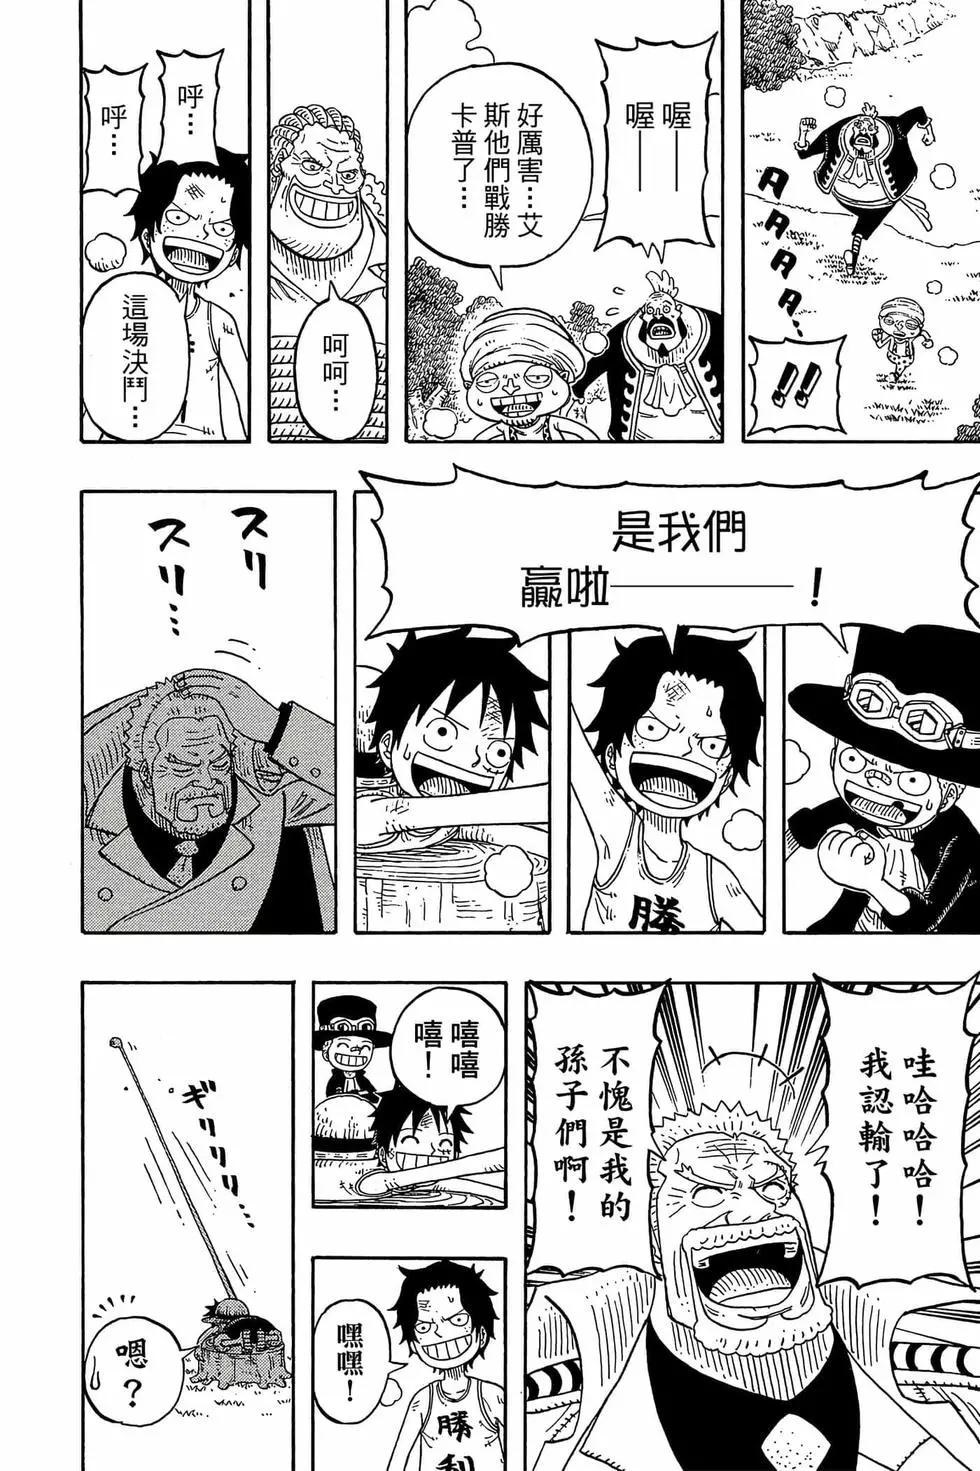 One piece party - 第03卷(2/4) - 7